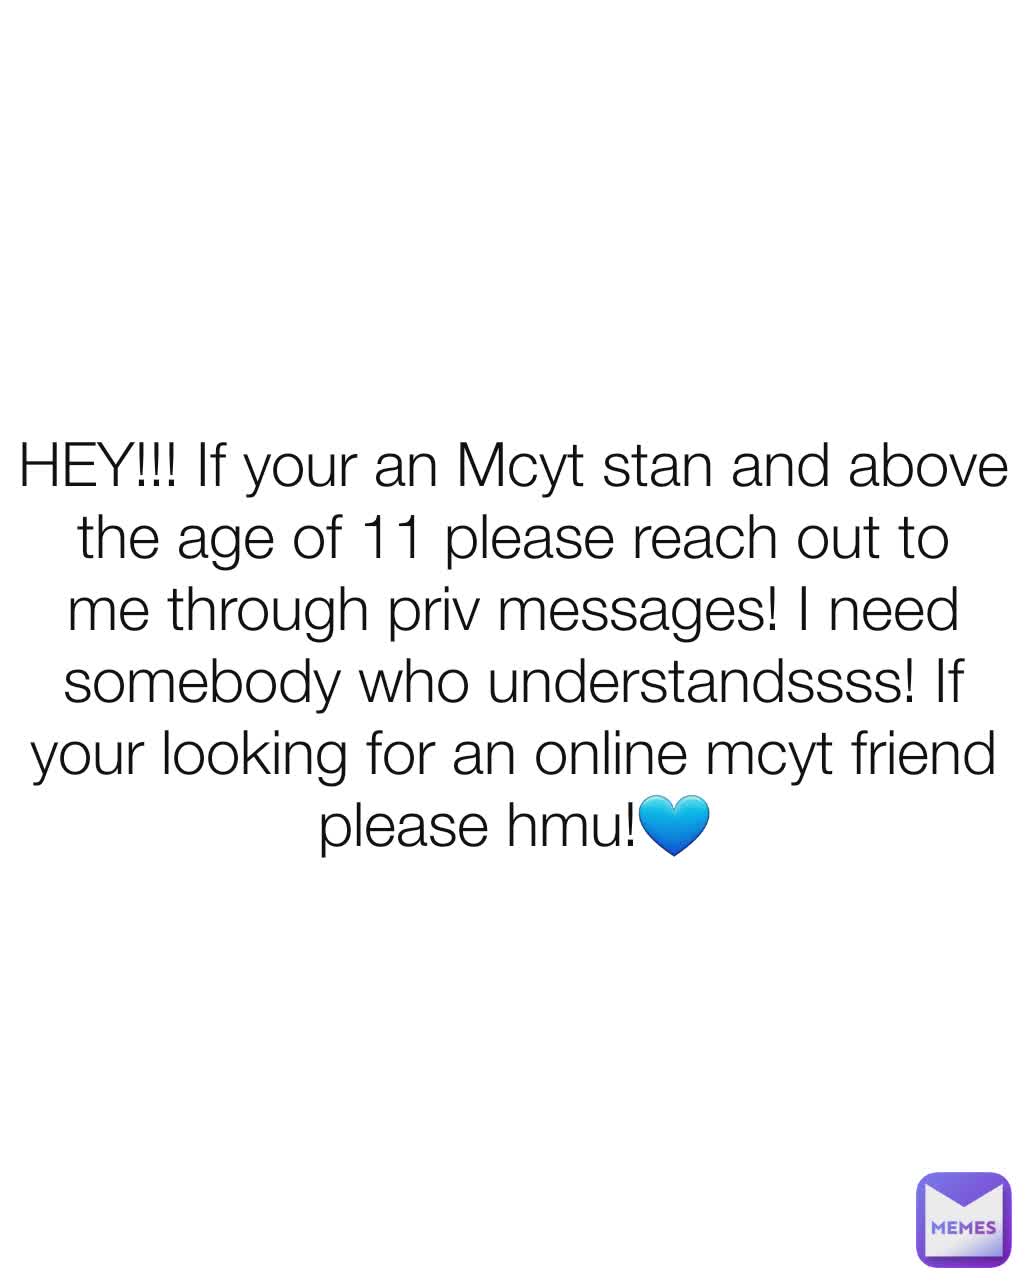 HEY!!! If your an Mcyt stan and above the age of 11 please reach out to me through priv messages! I need somebody who understandssss! If your looking for an online mcyt friend please hmu!💙